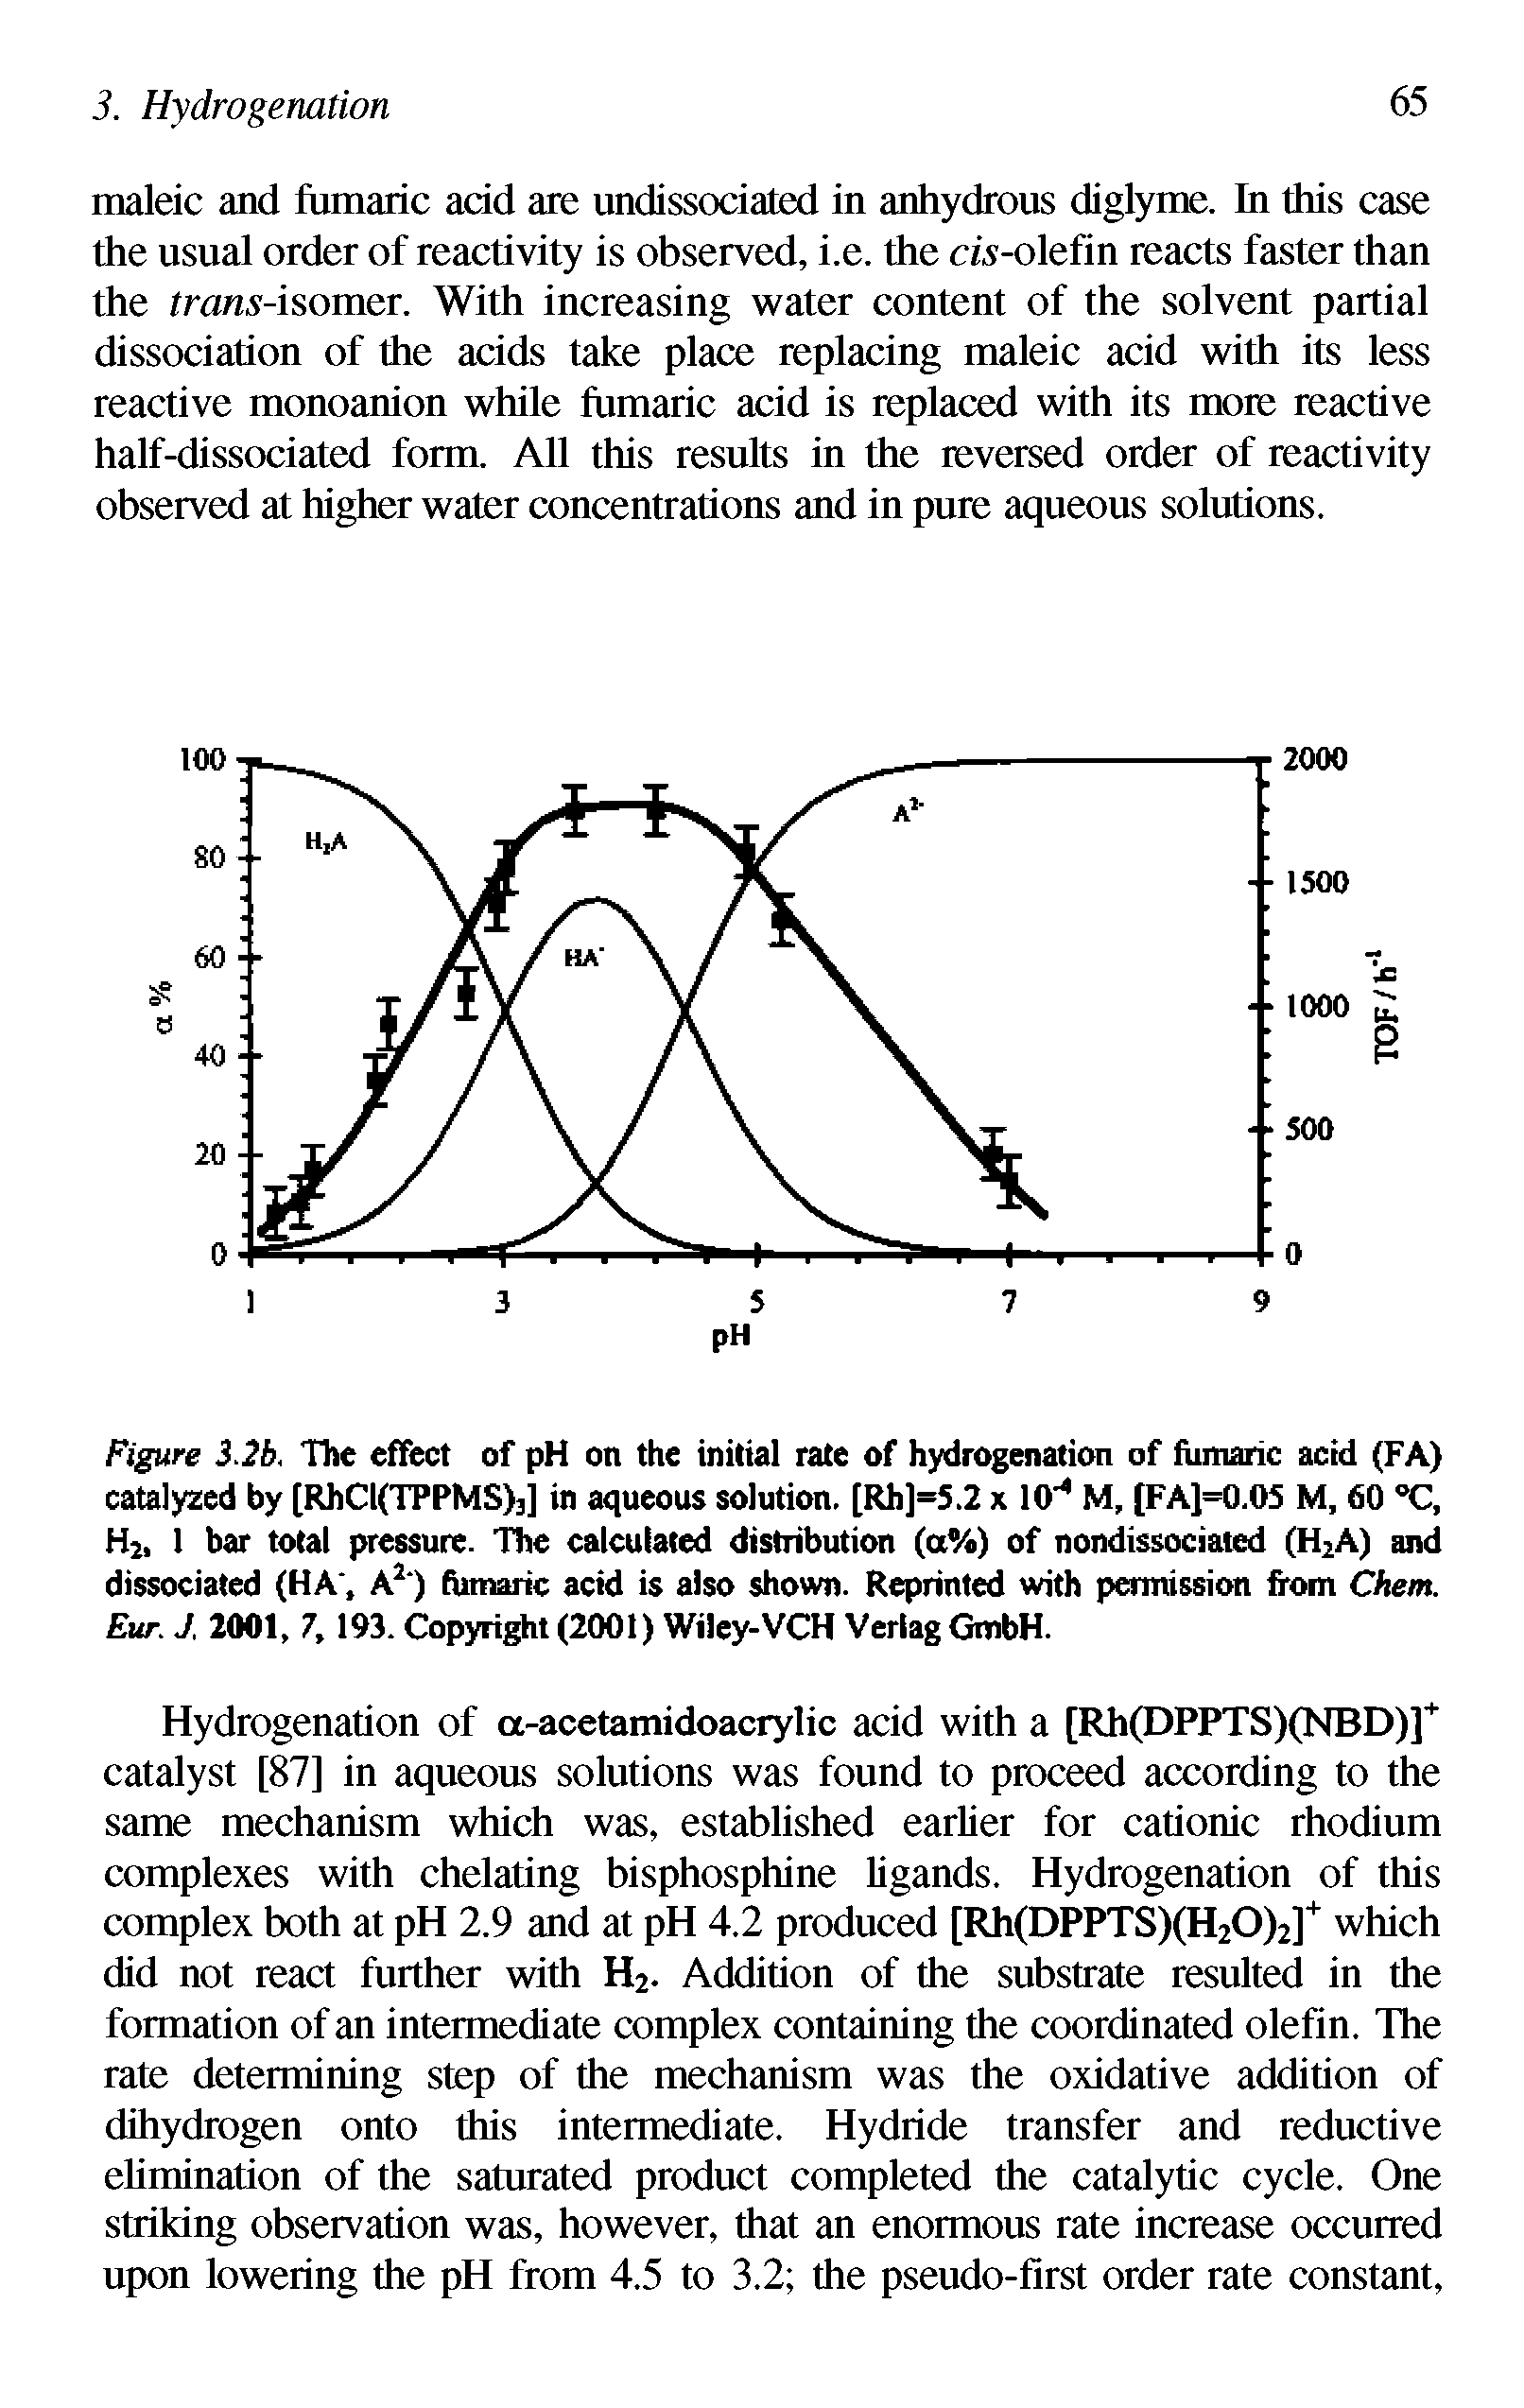 Figure 3.2b, The effect of pH on the initial rate of hydrogenation of fumaric acid (FA) catalyzed by [RhCl(TPPMS>3] in aqueous solution. [Rh]=5.2 x lO" M, [FA1=0.05 M, 60 C, Hi, 1 bar total pressure. The calculated distribution (a%) of nondissociated (H A) and dissociated (HA , fumaric acid is also shown. Reprinted with permission from Chem. Eur. J. 2001, 7, 193. Copyright (2001) Wiley-VCH Verlag GmbH.